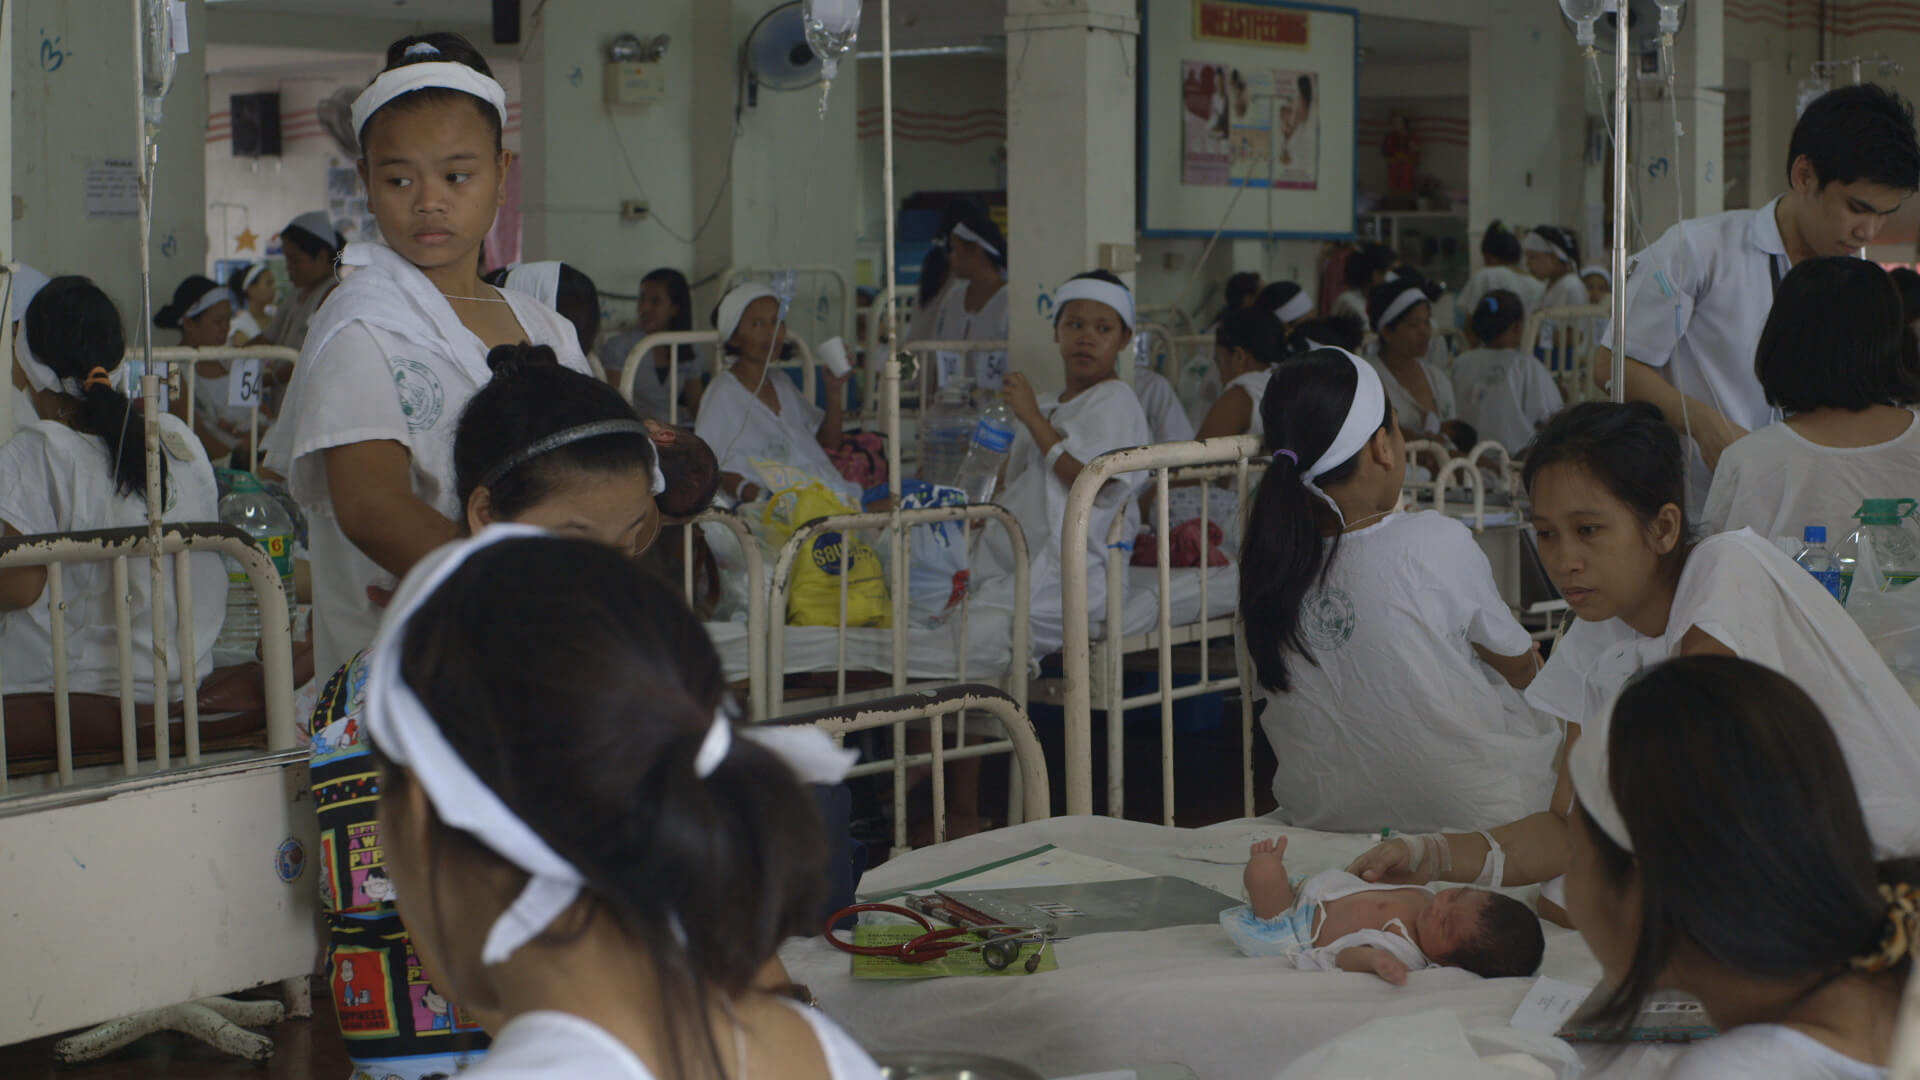 Still from Motherland. A hospital ward with many beds filled with women in various positions–standing, sitting, and talking with one another. In the center, an infant is lying on an empty bed with women surrounding them.